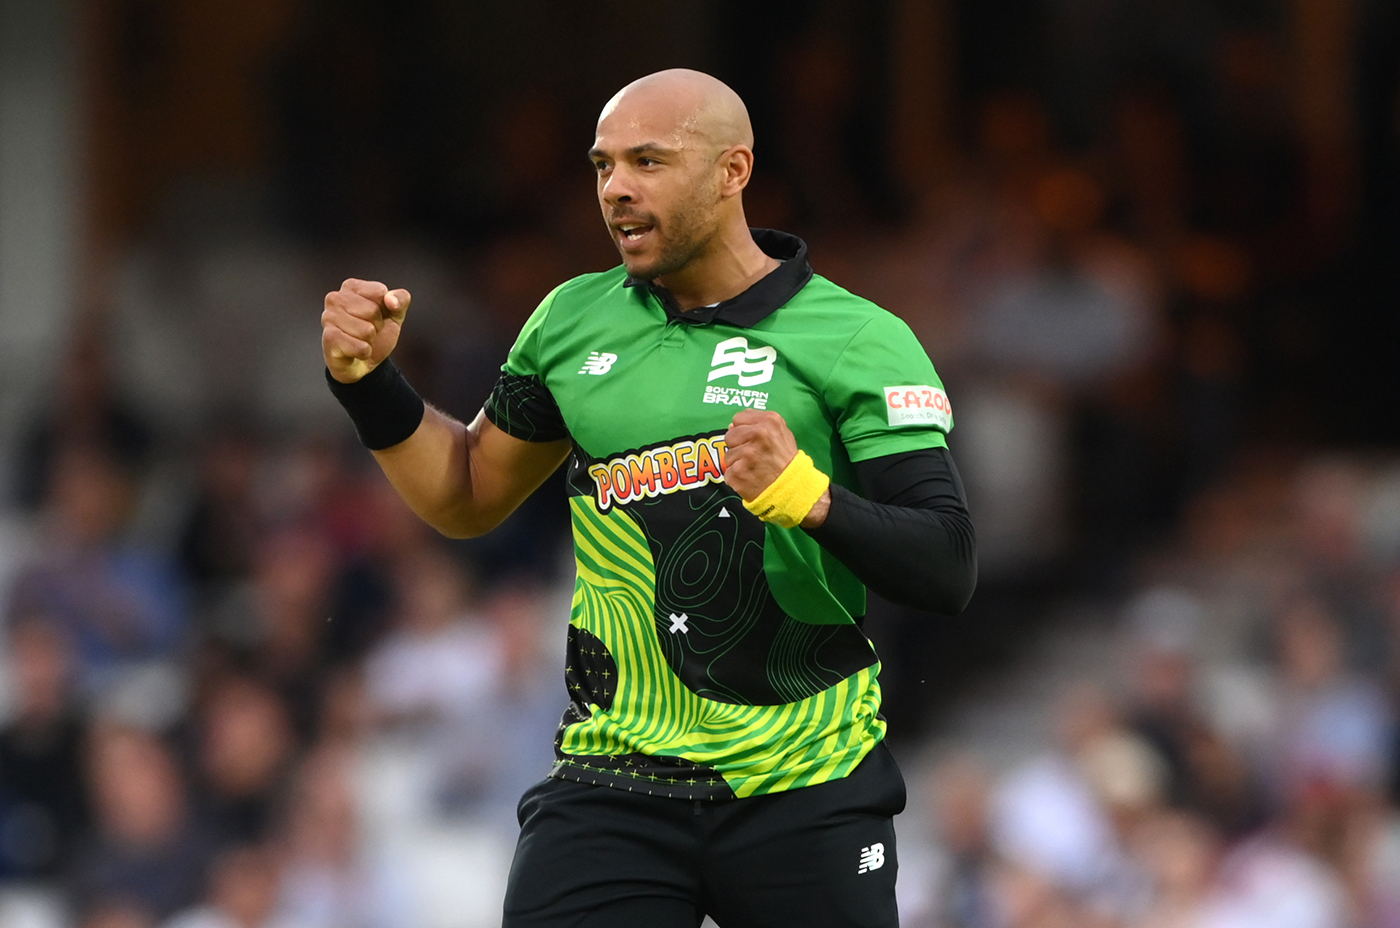 Tymal Mills profile and biography, stats, records, averages, photos and videos